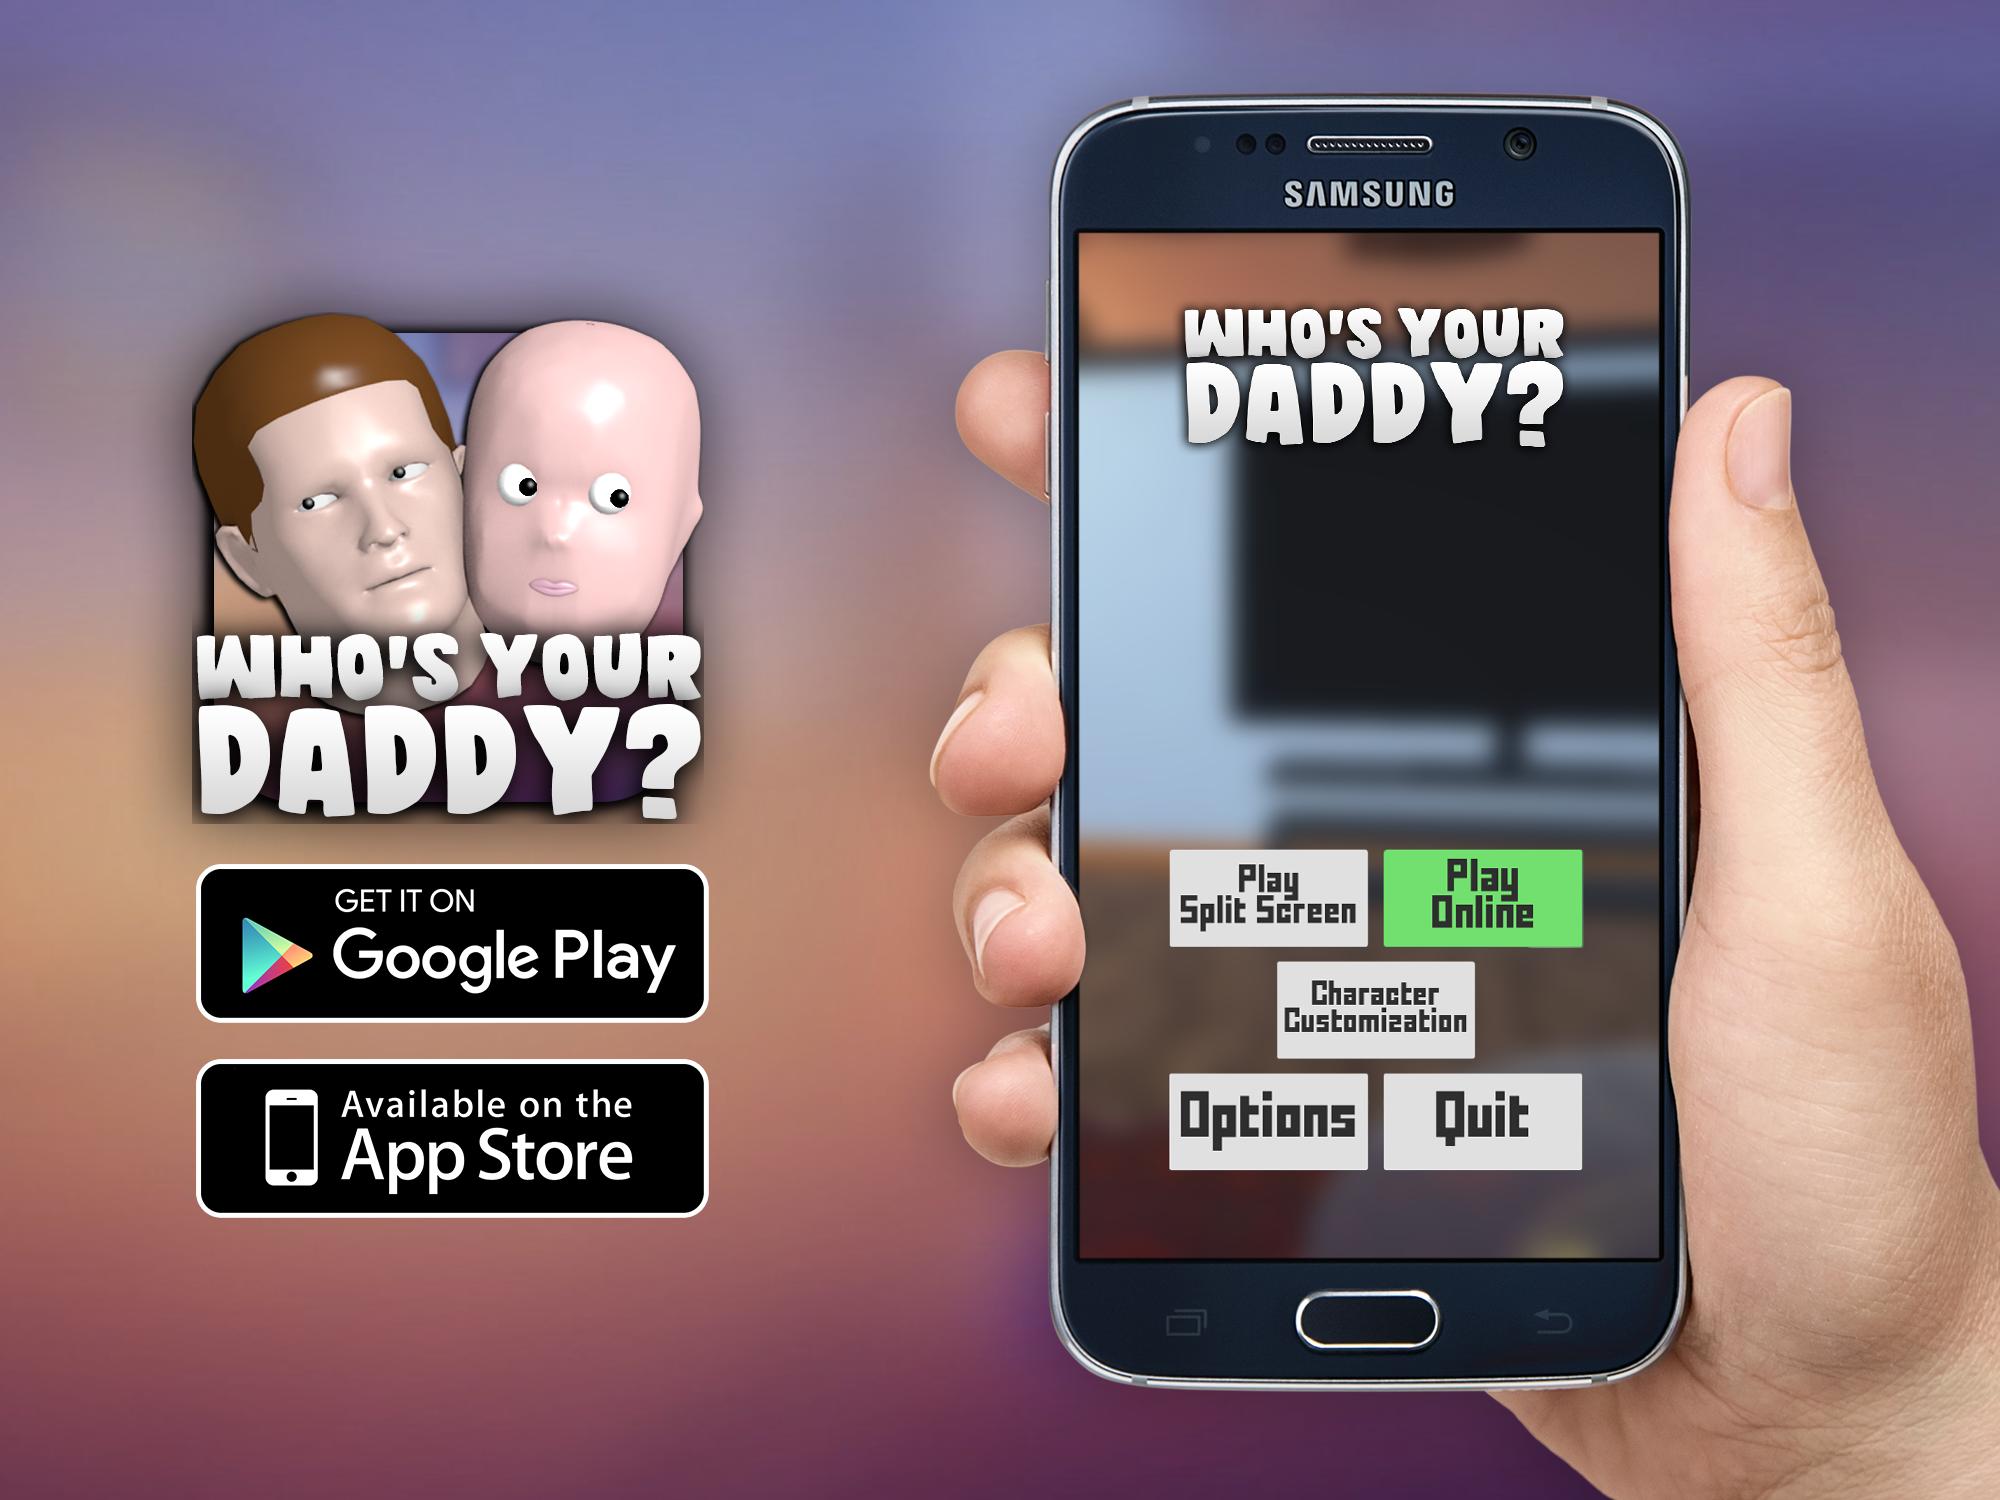 Veroxx игра whos your daddy. Who is your Daddy игра. Whos your Daddy на андроид. Who s your Daddy Android. Who's your Daddy на двоих.